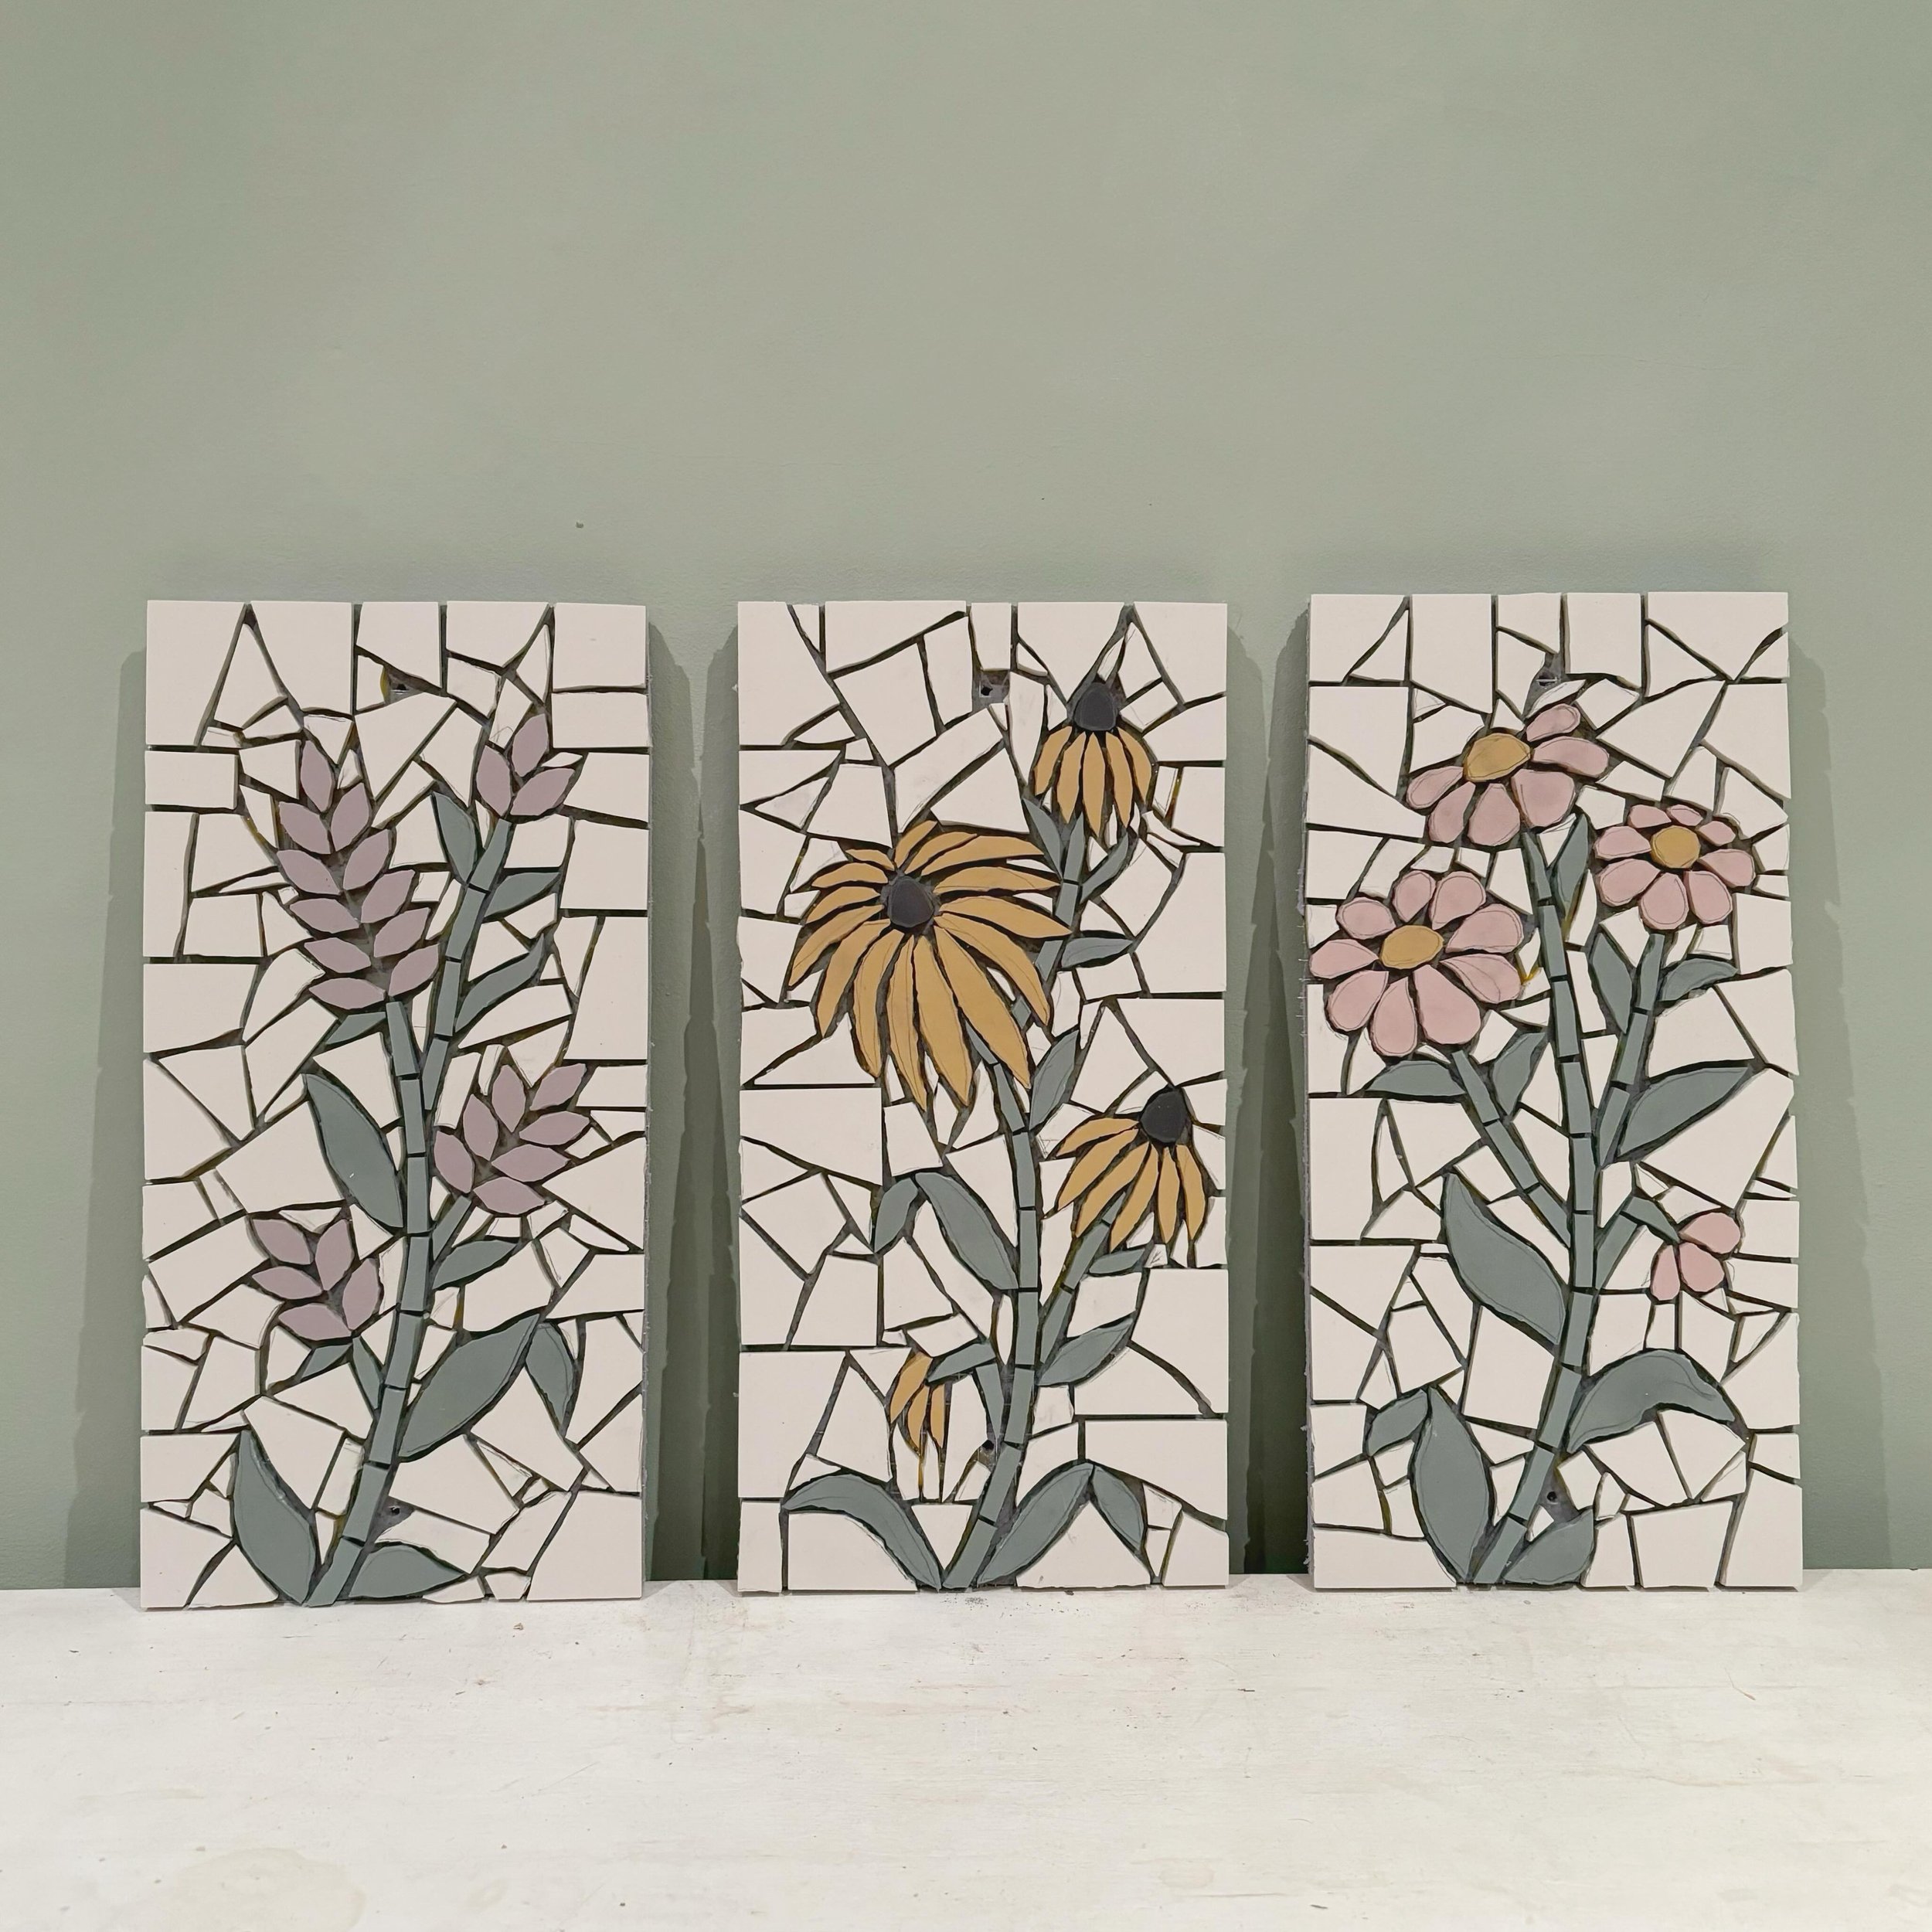 This little botanical trio is finally finished, although yet to be grouted.

Now I just need to decide whether to sell them as a trio or individually!

What do you think?

#mosaicsbyjo #mosaicart #mosaicflowers #flowers #flowertriptych #floraldesign 